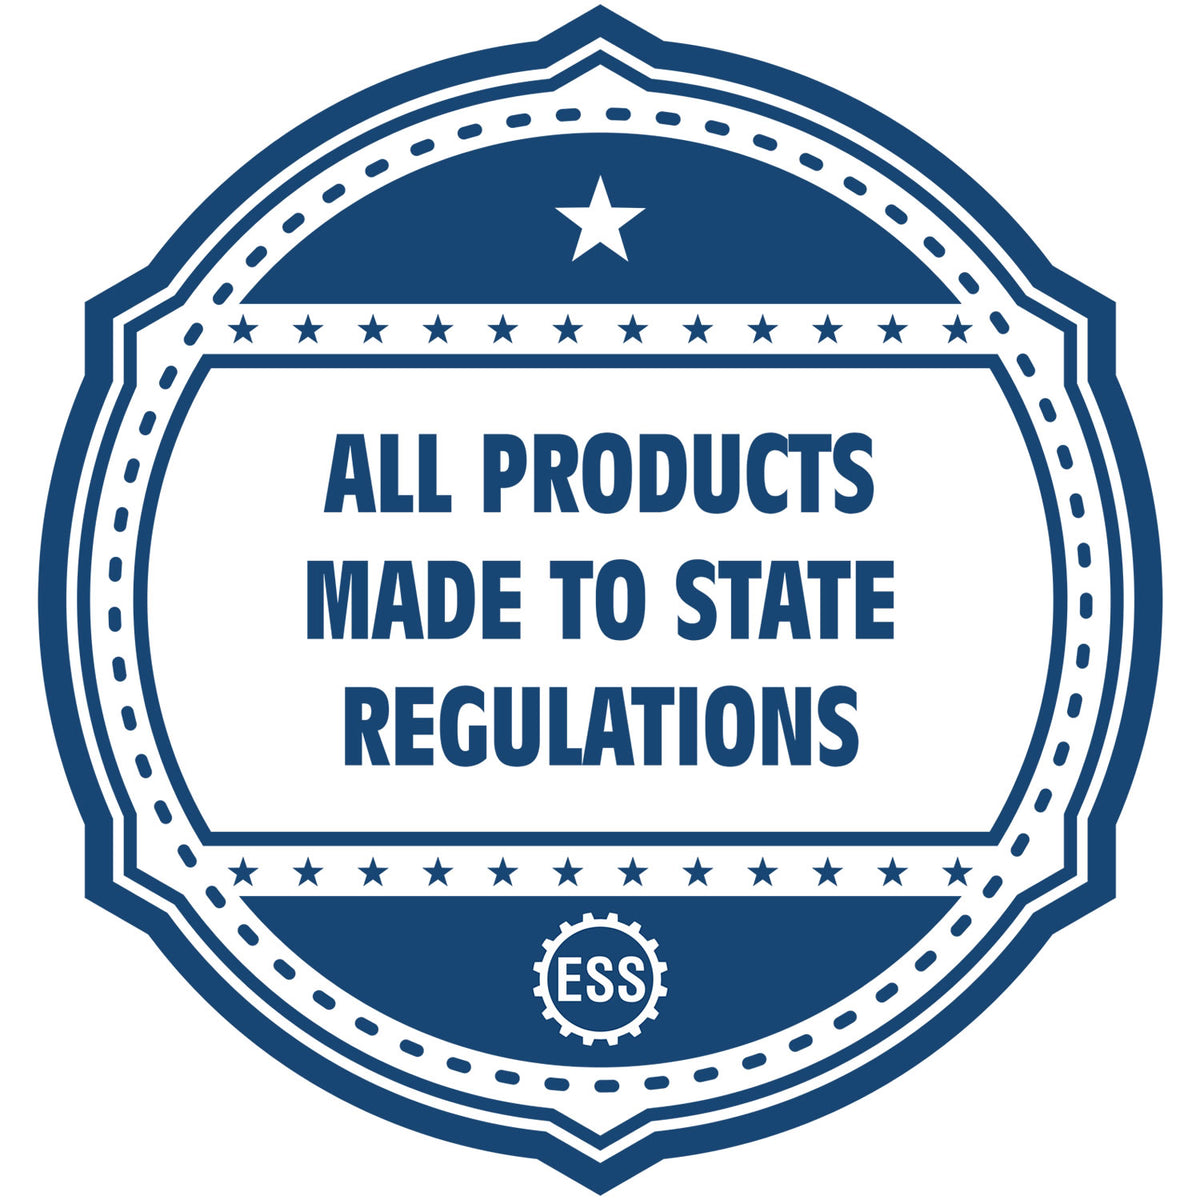 An icon or badge element for the State of New Mexico Architectural Seal Embosser showing that this product is made in compliance with state regulations.